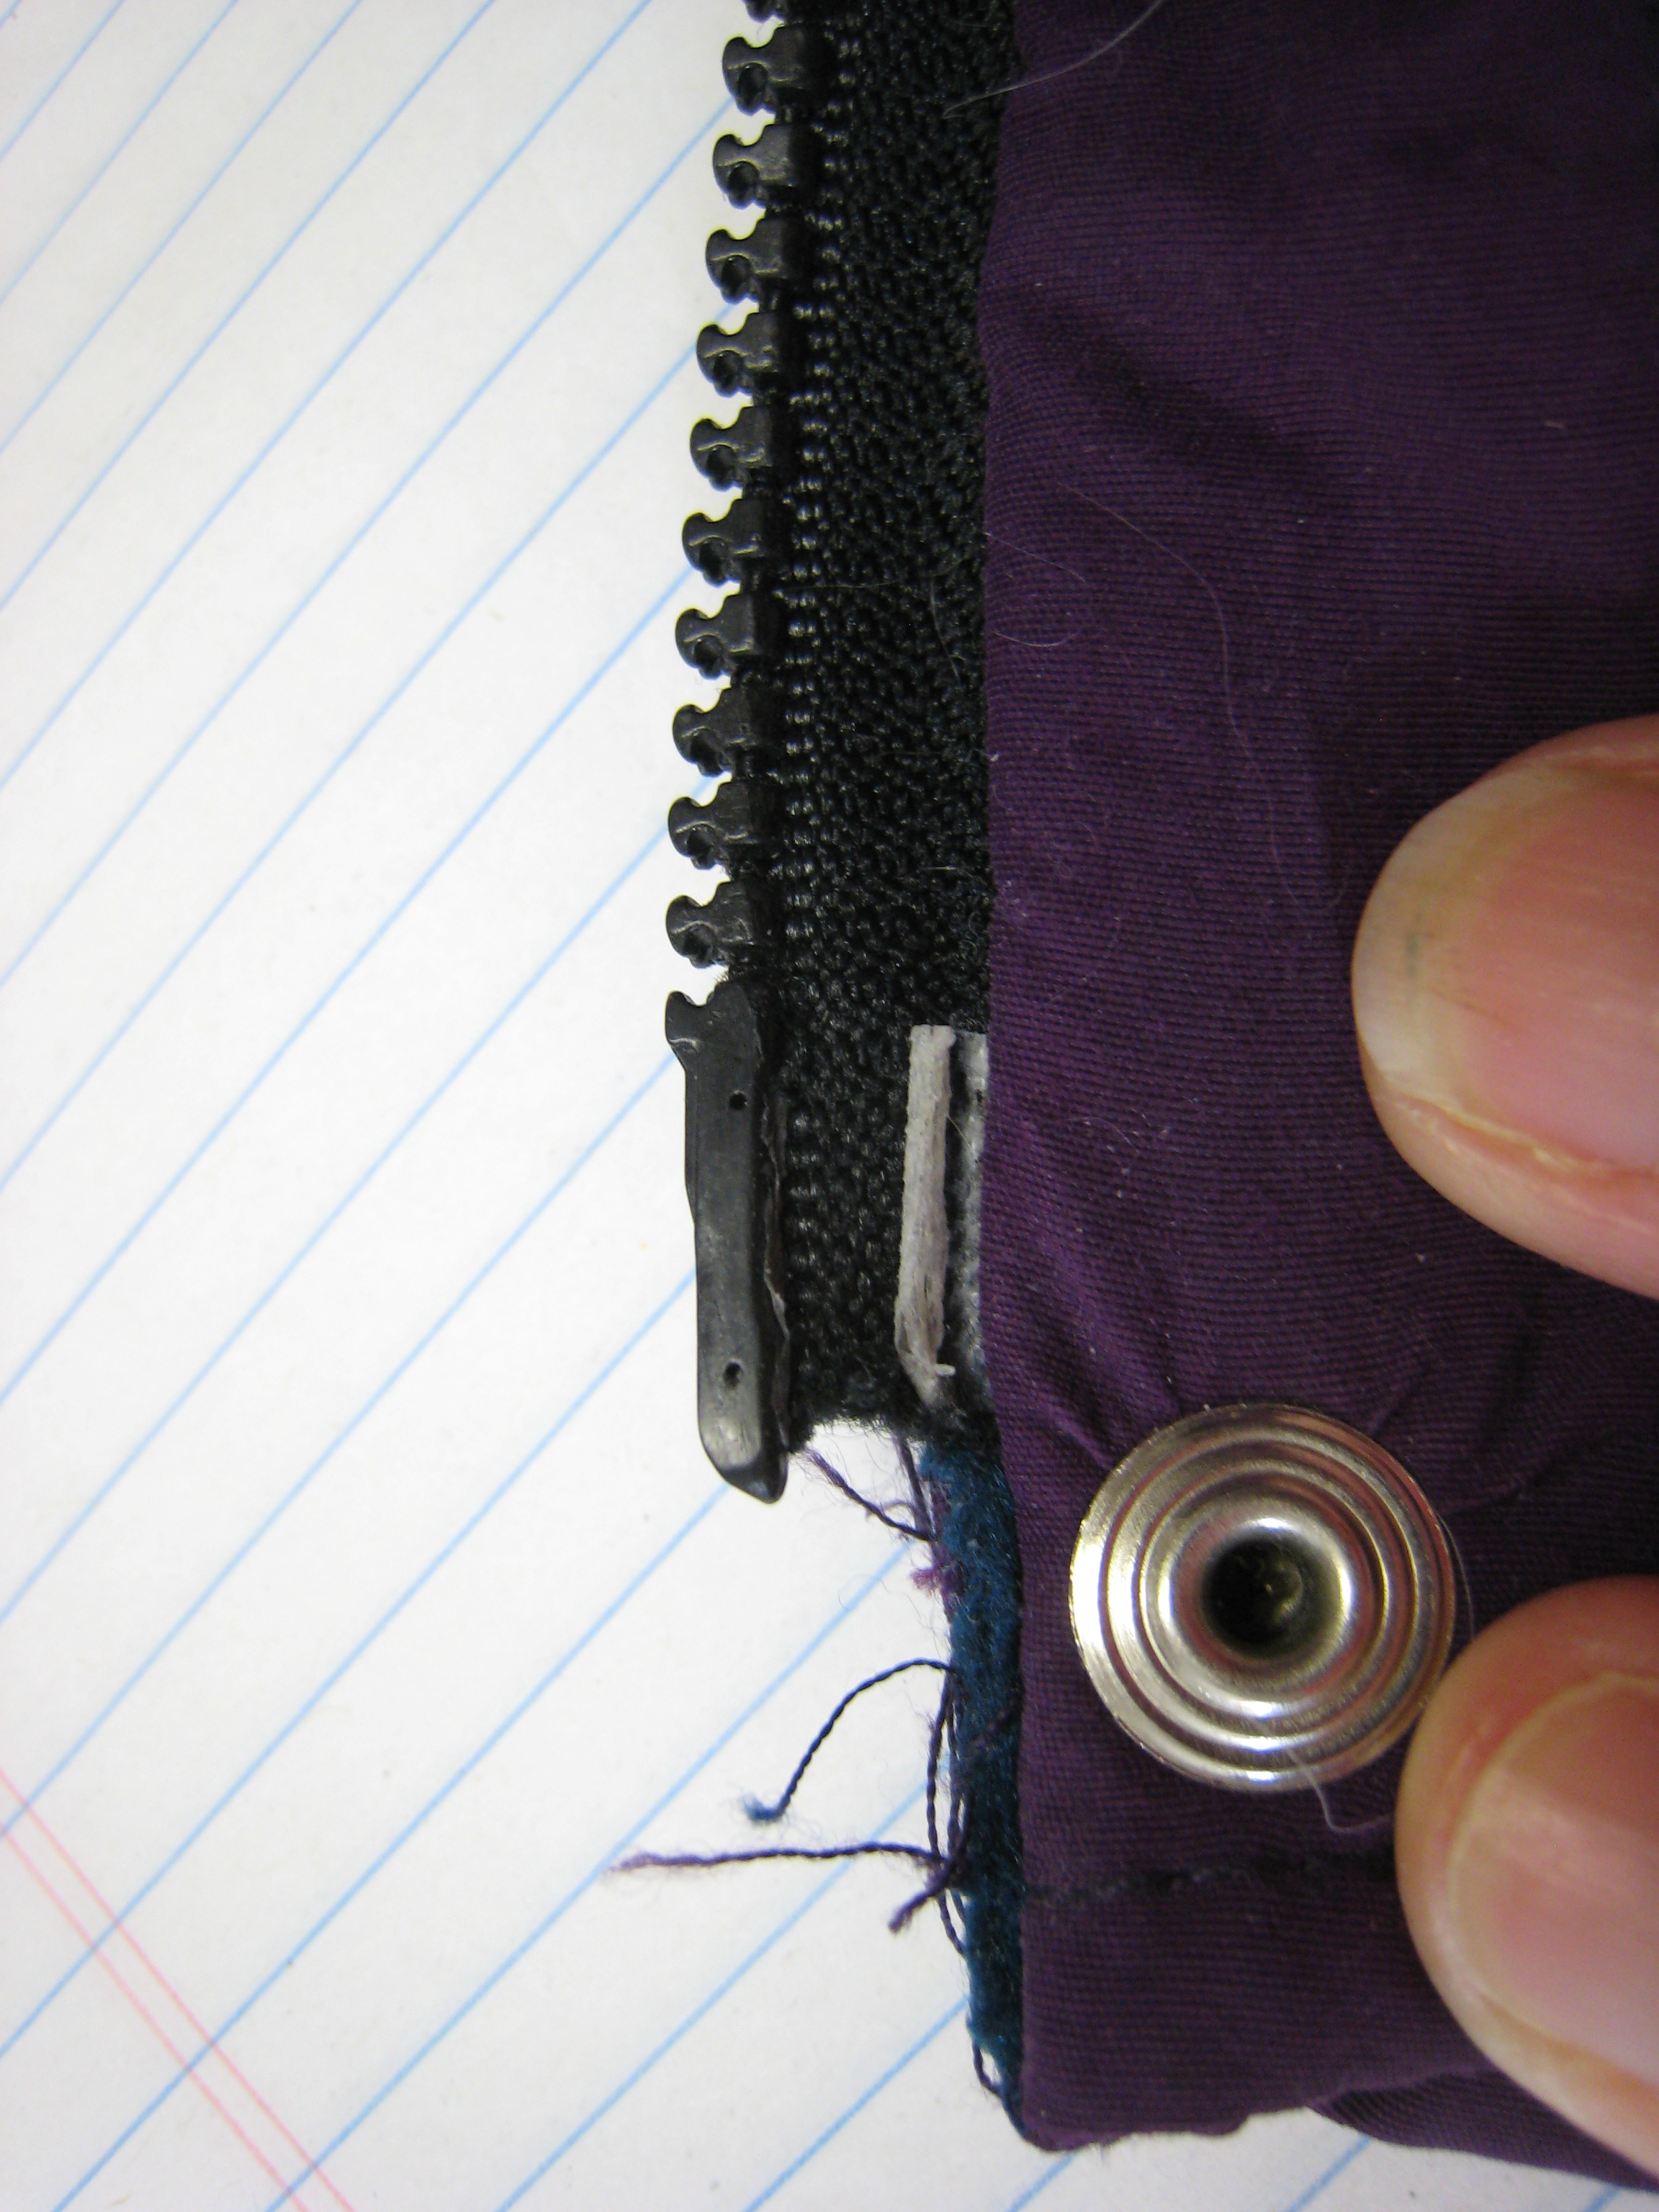 Zippers 101: Identifying Issues, Types & DIY Repair Solutions